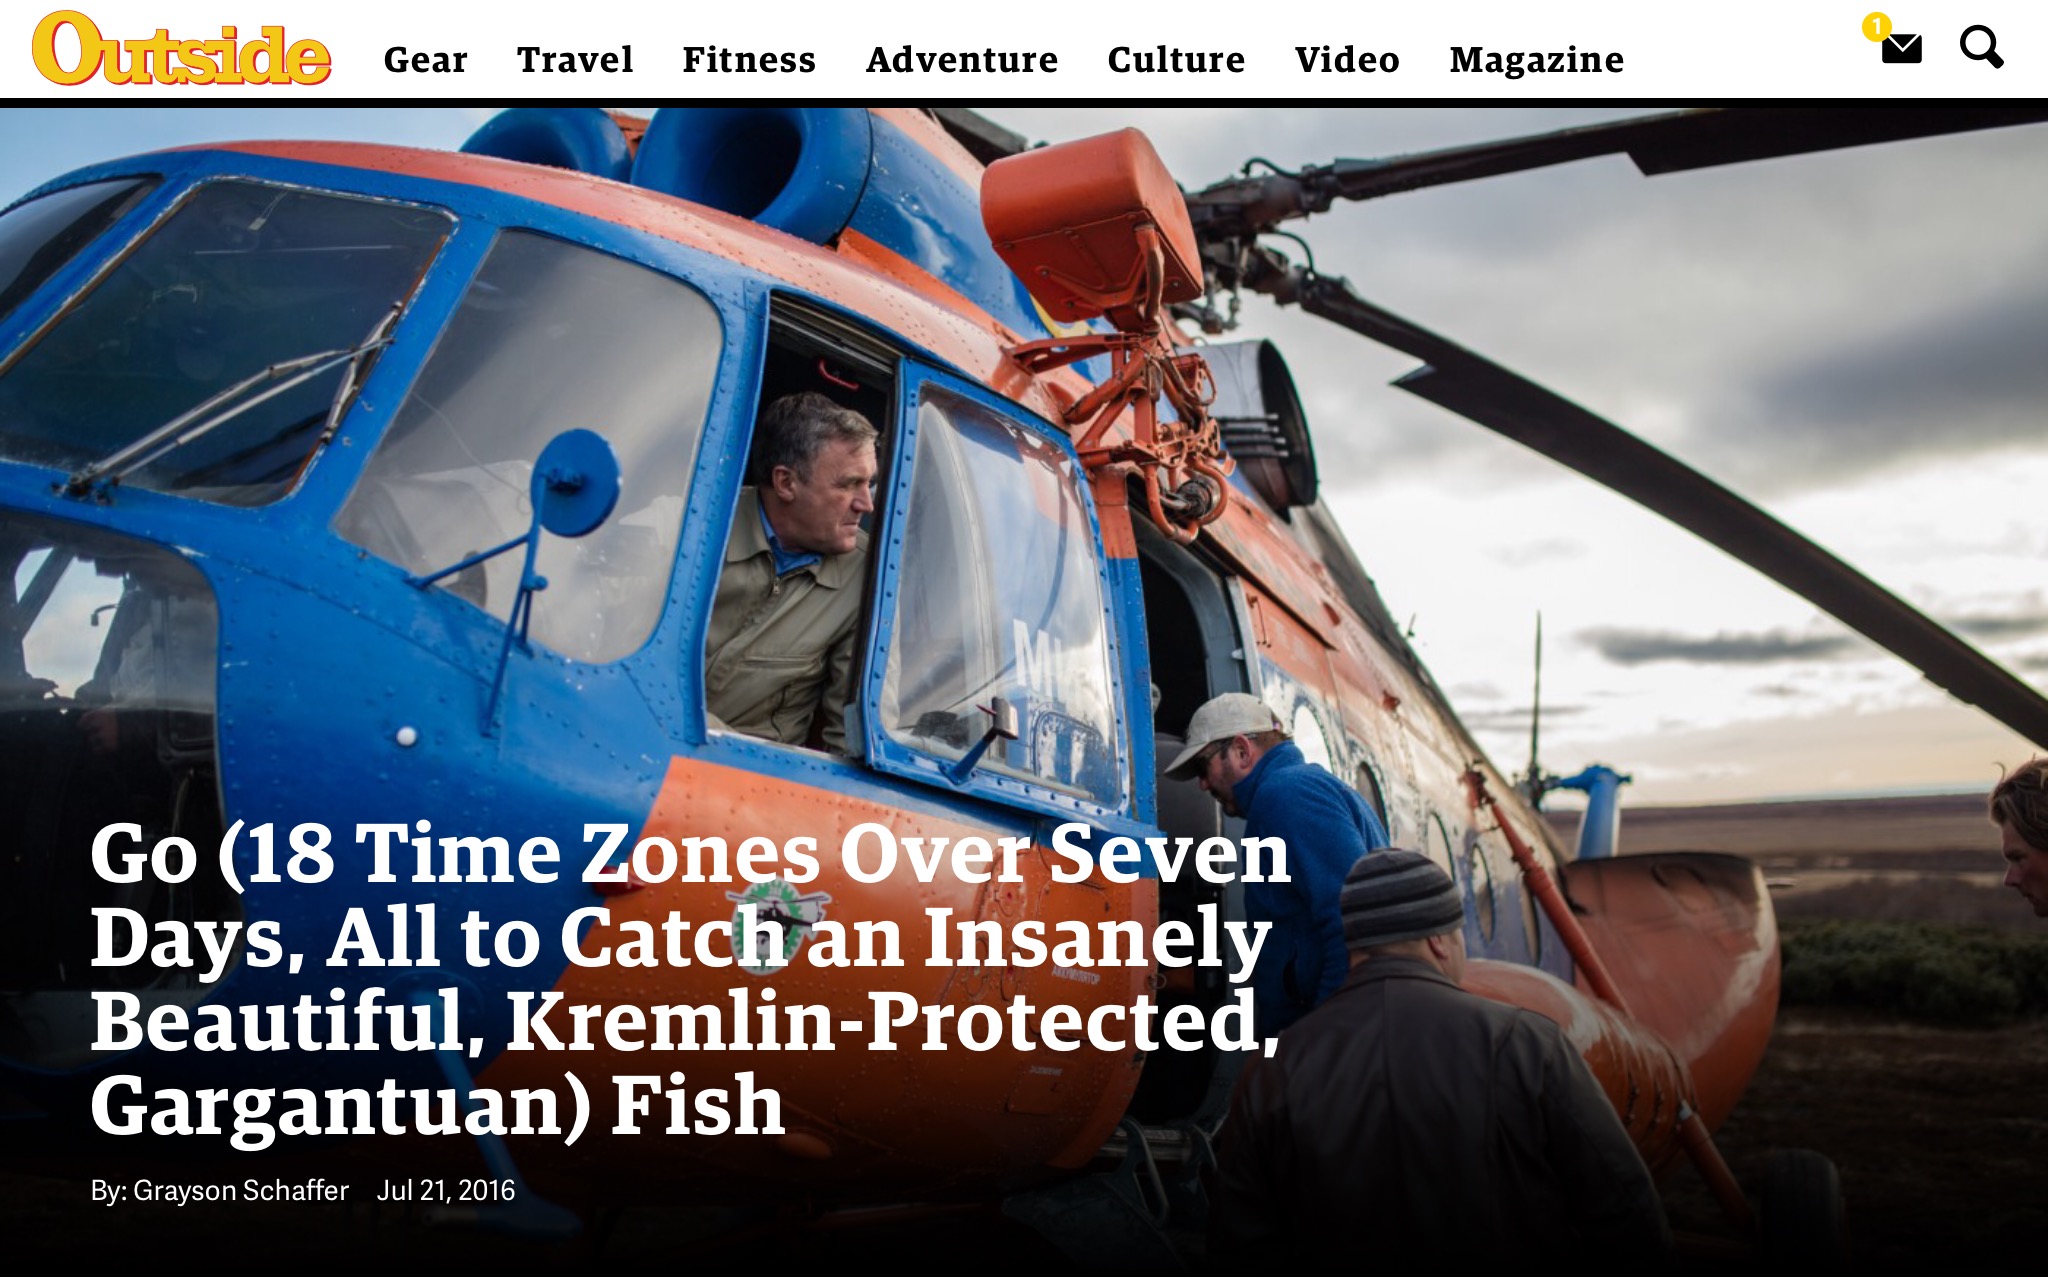 Go (18 Time Zones Over Seven Days, All to Catch an Insanely Beautiful, Kremlin-Protected, Gargantuan) Fish